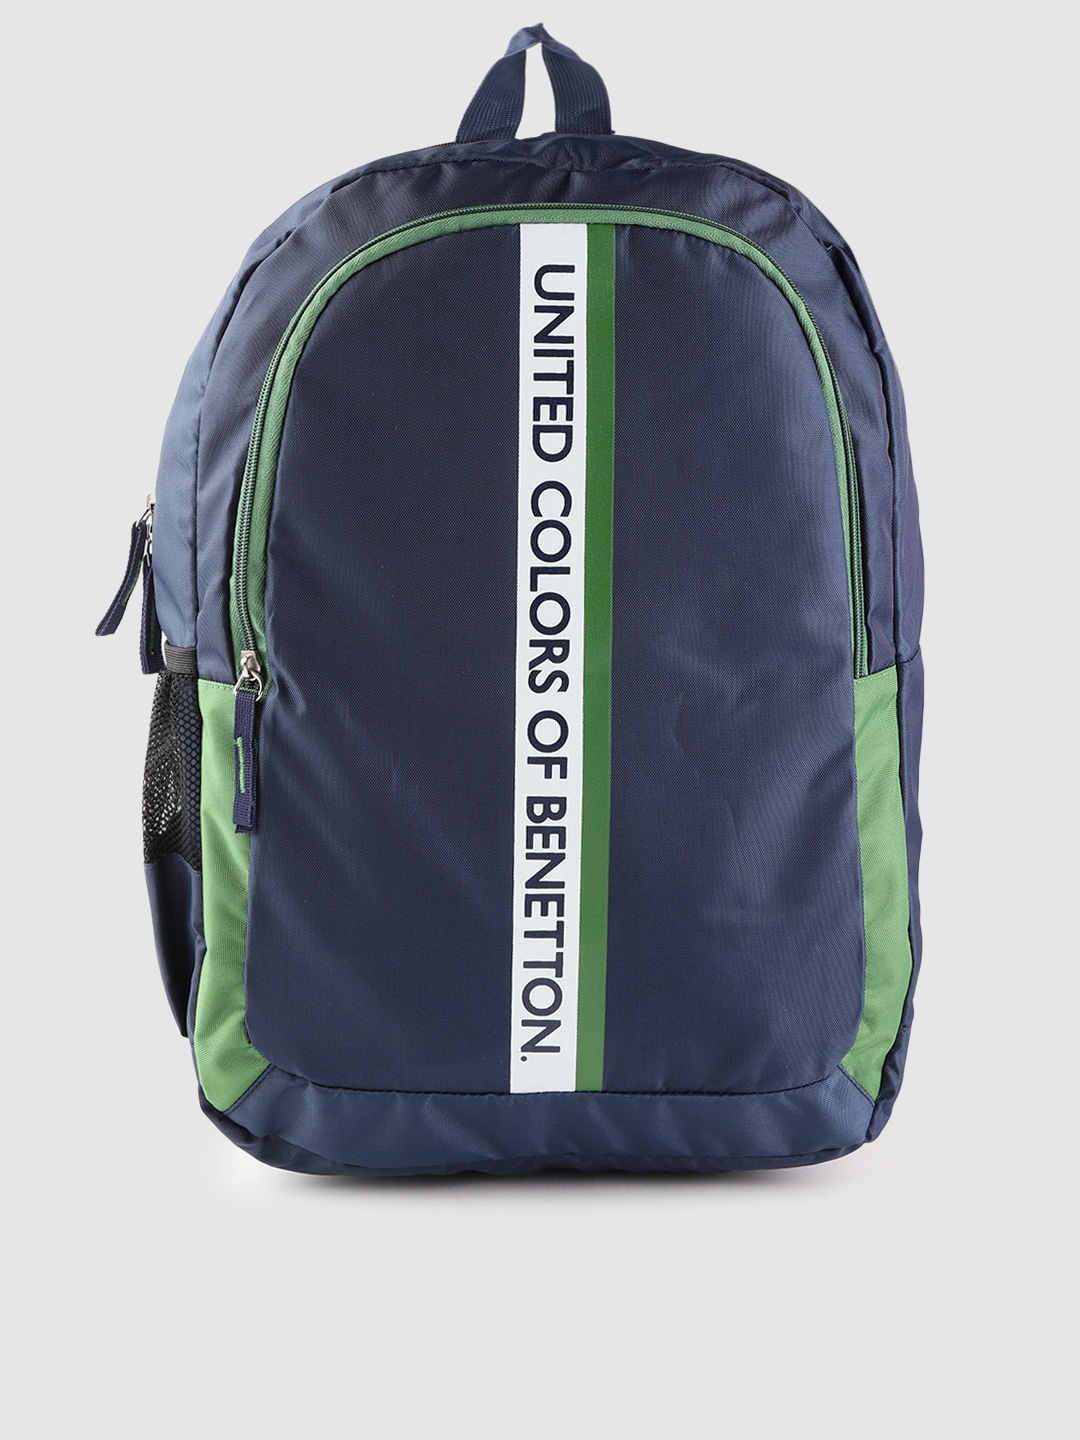 United Colors of Benetton Unisex Navy Blue Printed Backpack Price in India